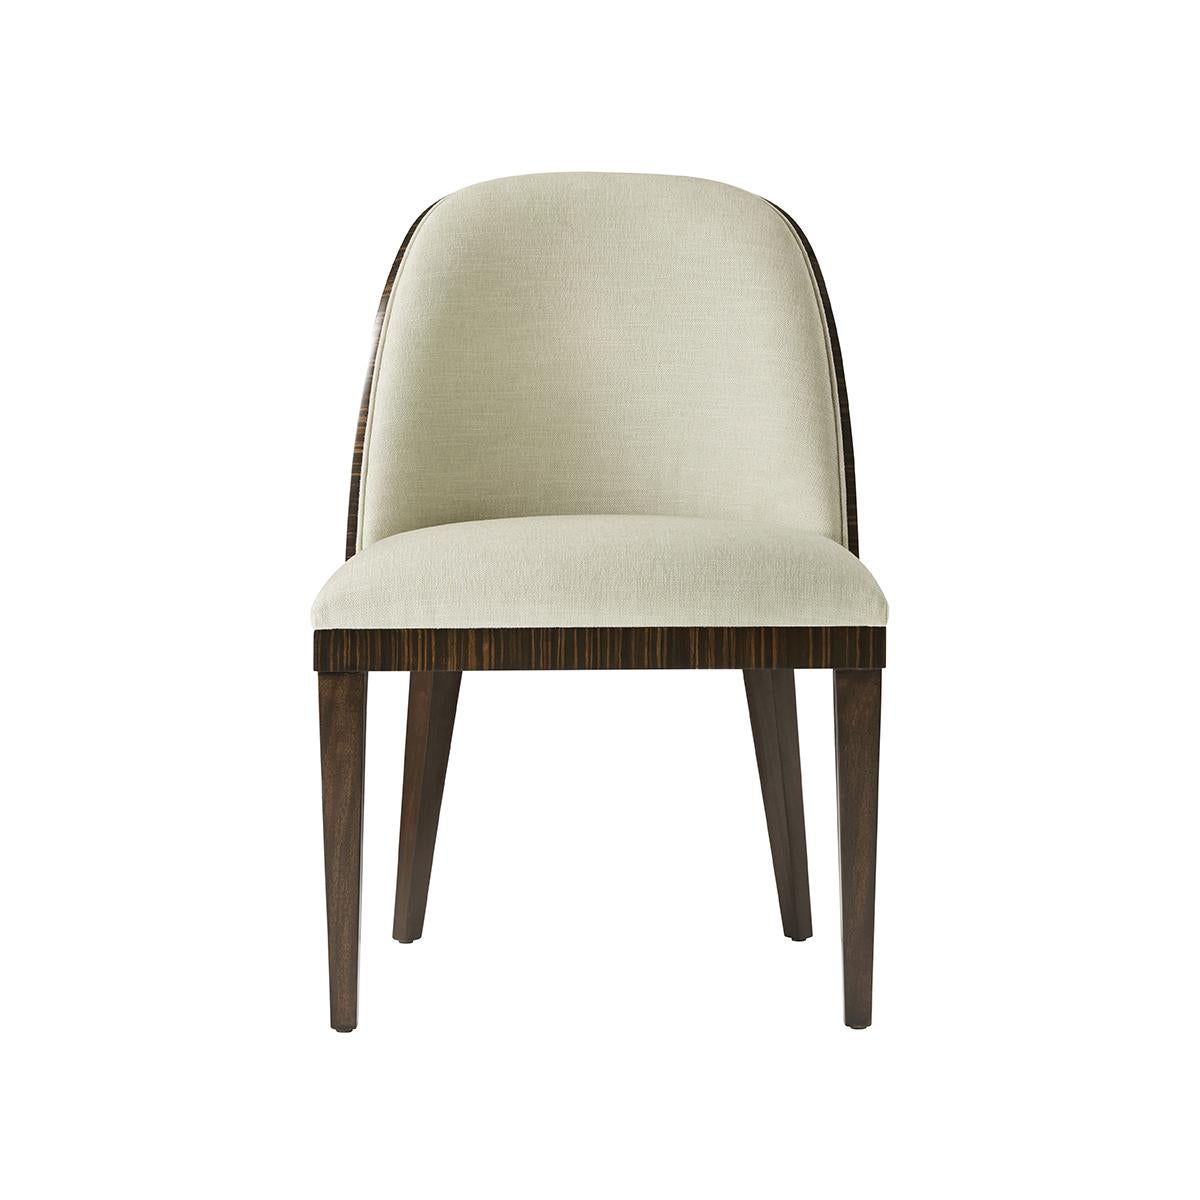 With a curved upholstered backrest and cushion seat. The reverse in a crafted exotic finish atop elegant and simple square tapered legs.

Dimensions: 22